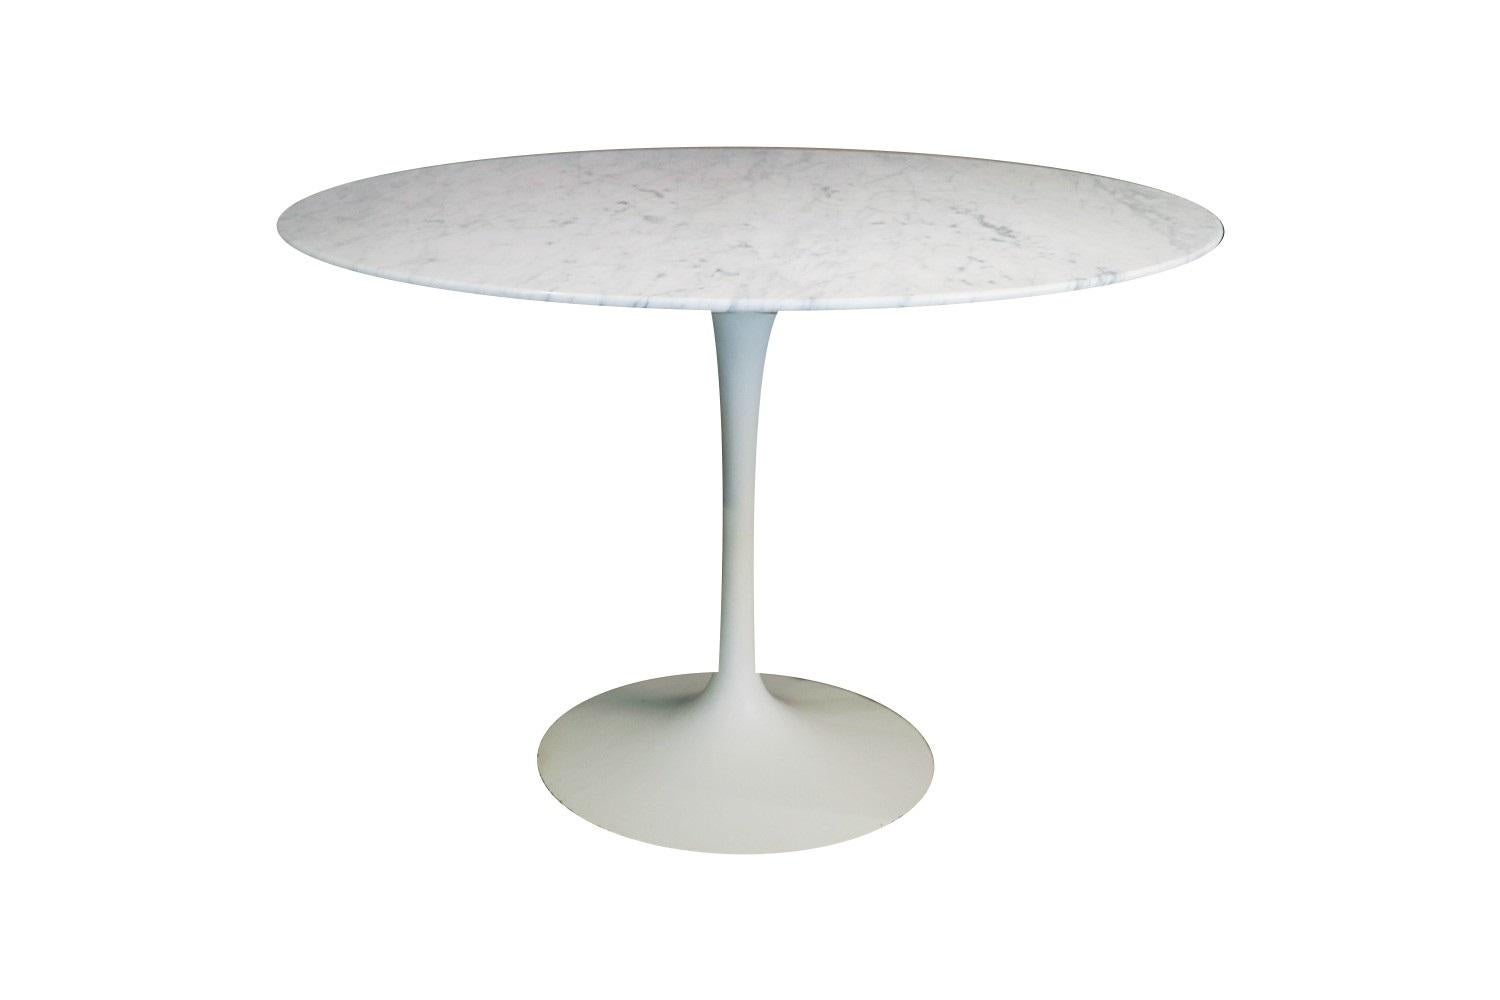 Classic Mid-Century Modern round Saarinen Tulip pedestal marble table for Knoll designed by Eero Saarinen (USA 1910-1961) for Knoll Furniture International in 1956. Comfortably seats four people. Features original Italian, ivory white with grey